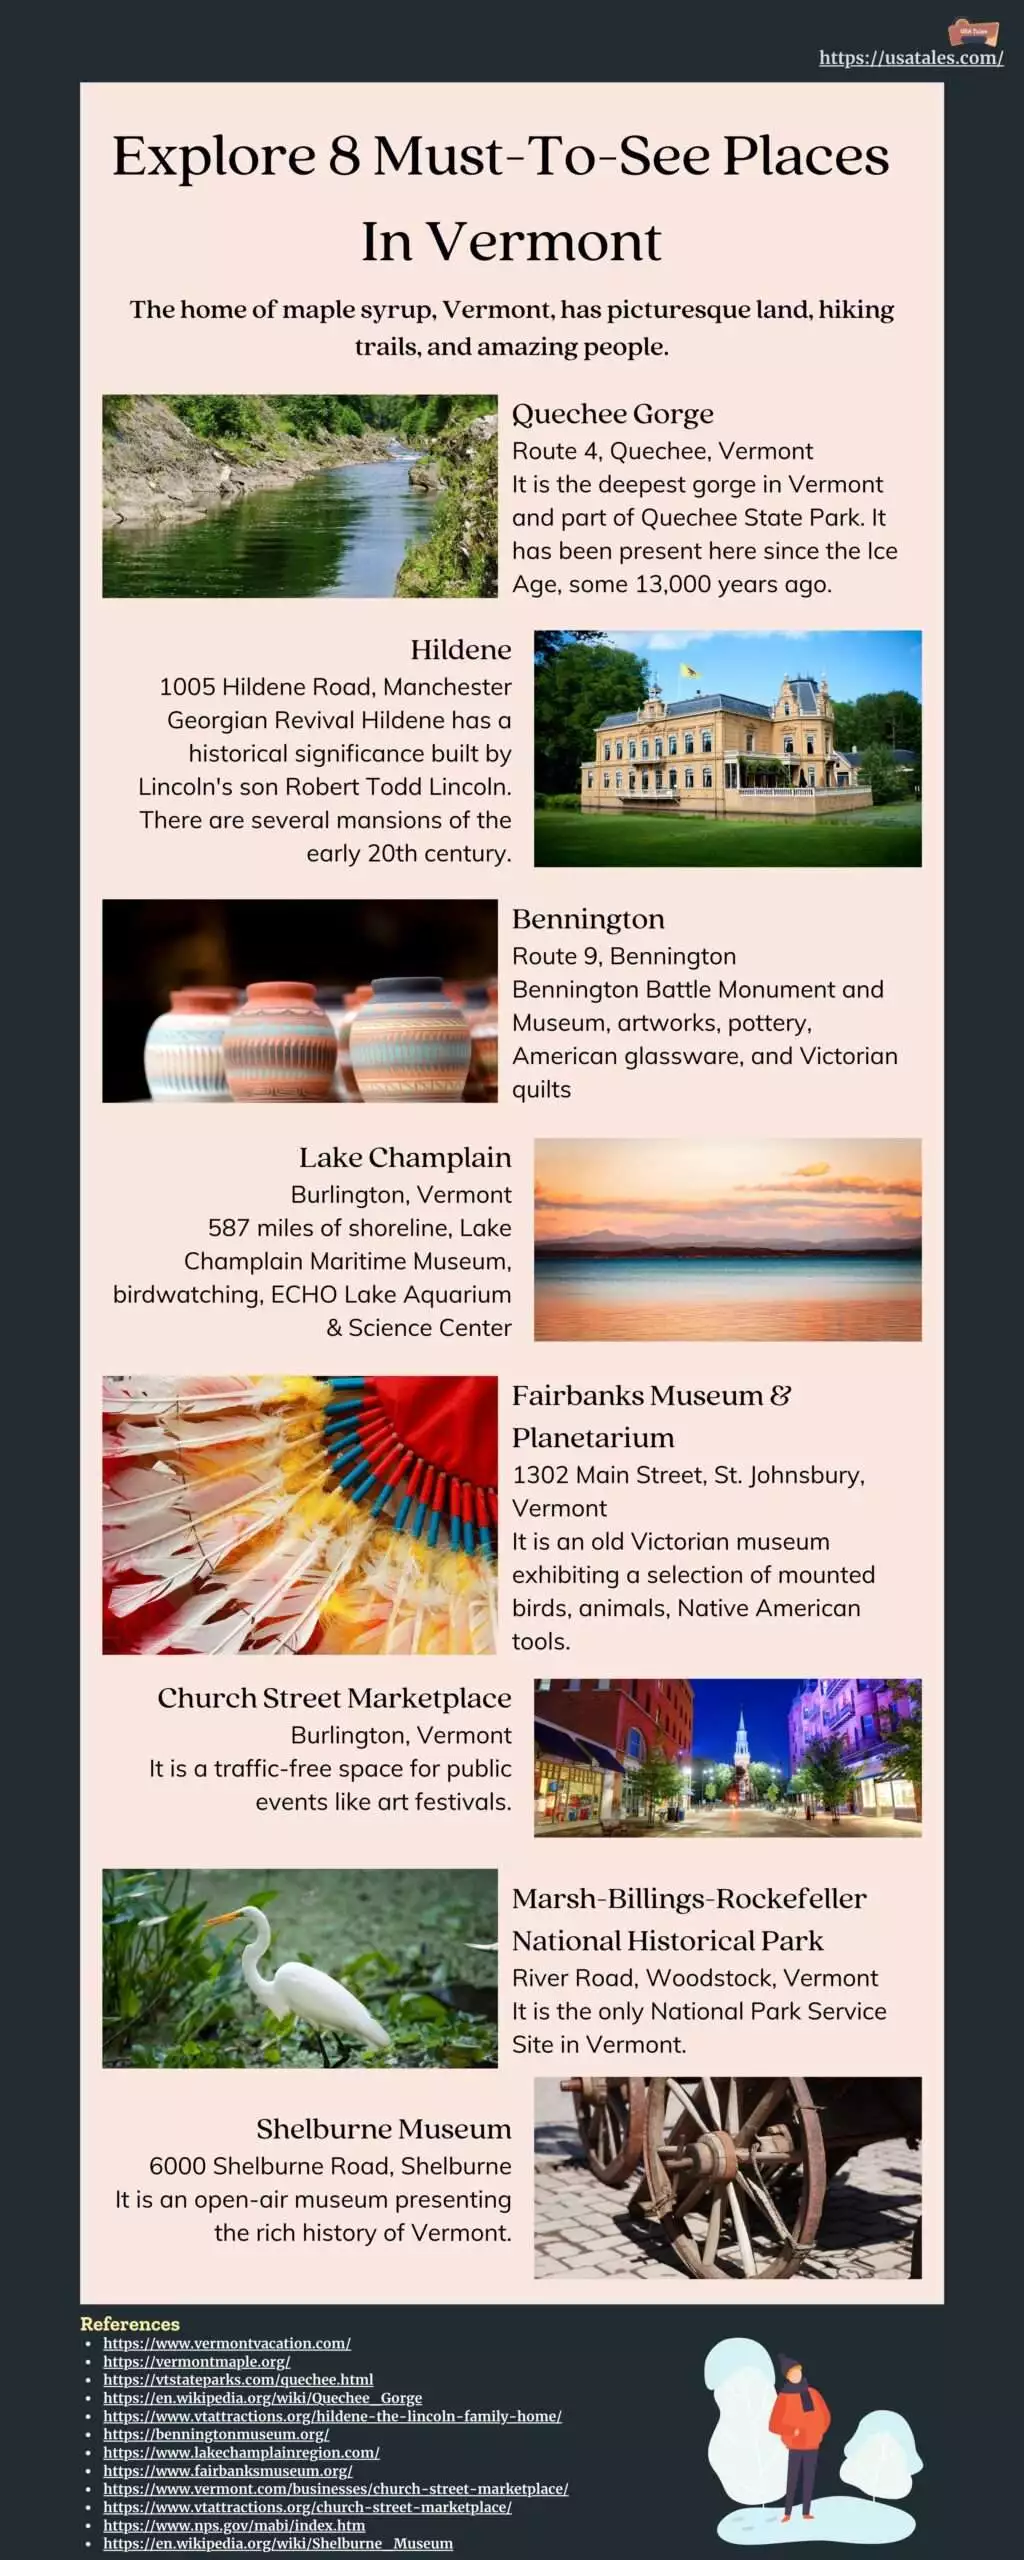 Infographic That Helps Explore 8 Must-To-See Places In Vermont